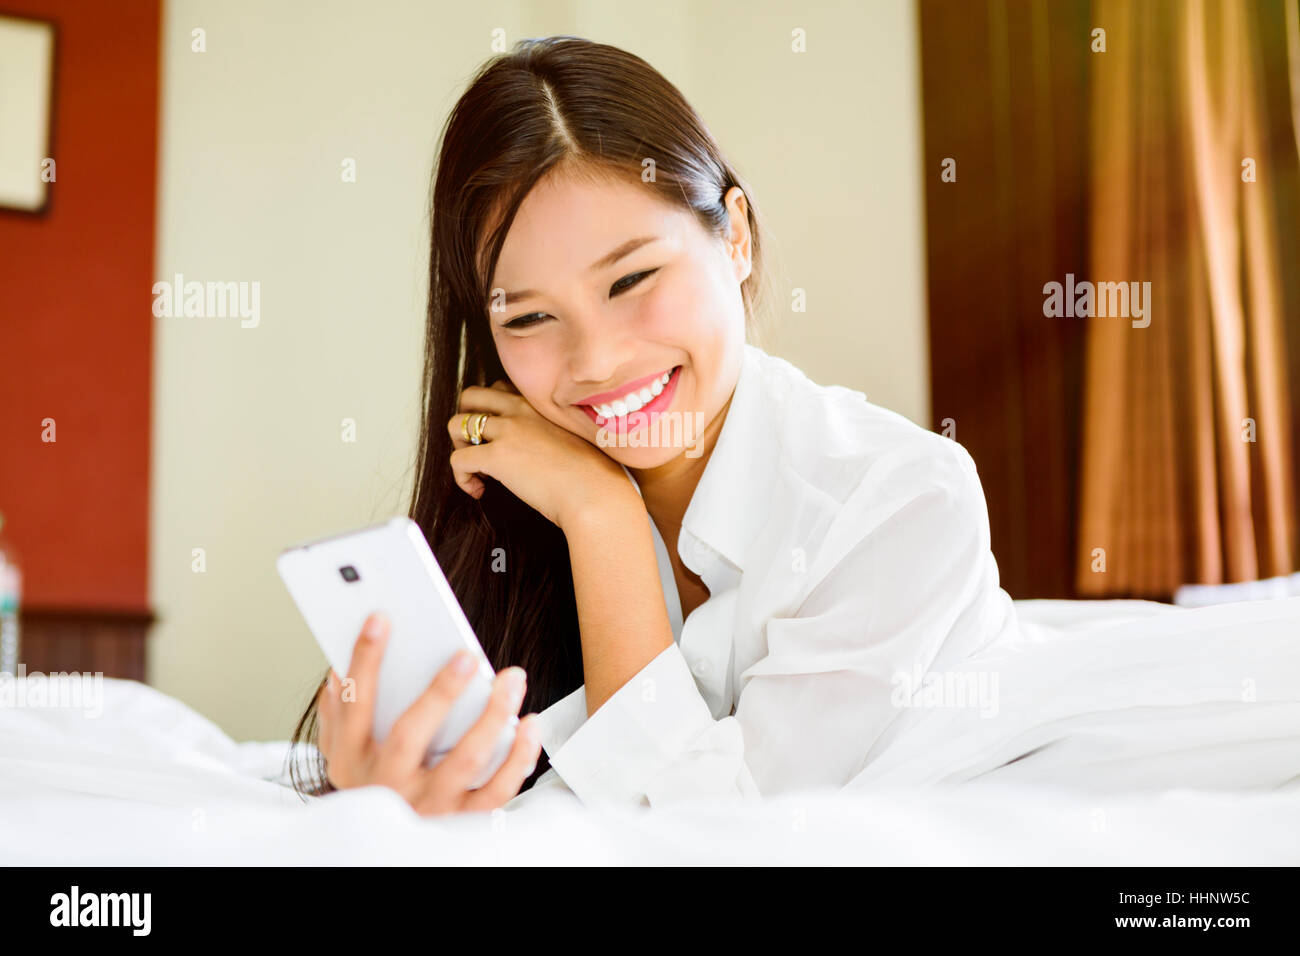 Smiling Asian teenage girl texting on cell phone Stock Photo